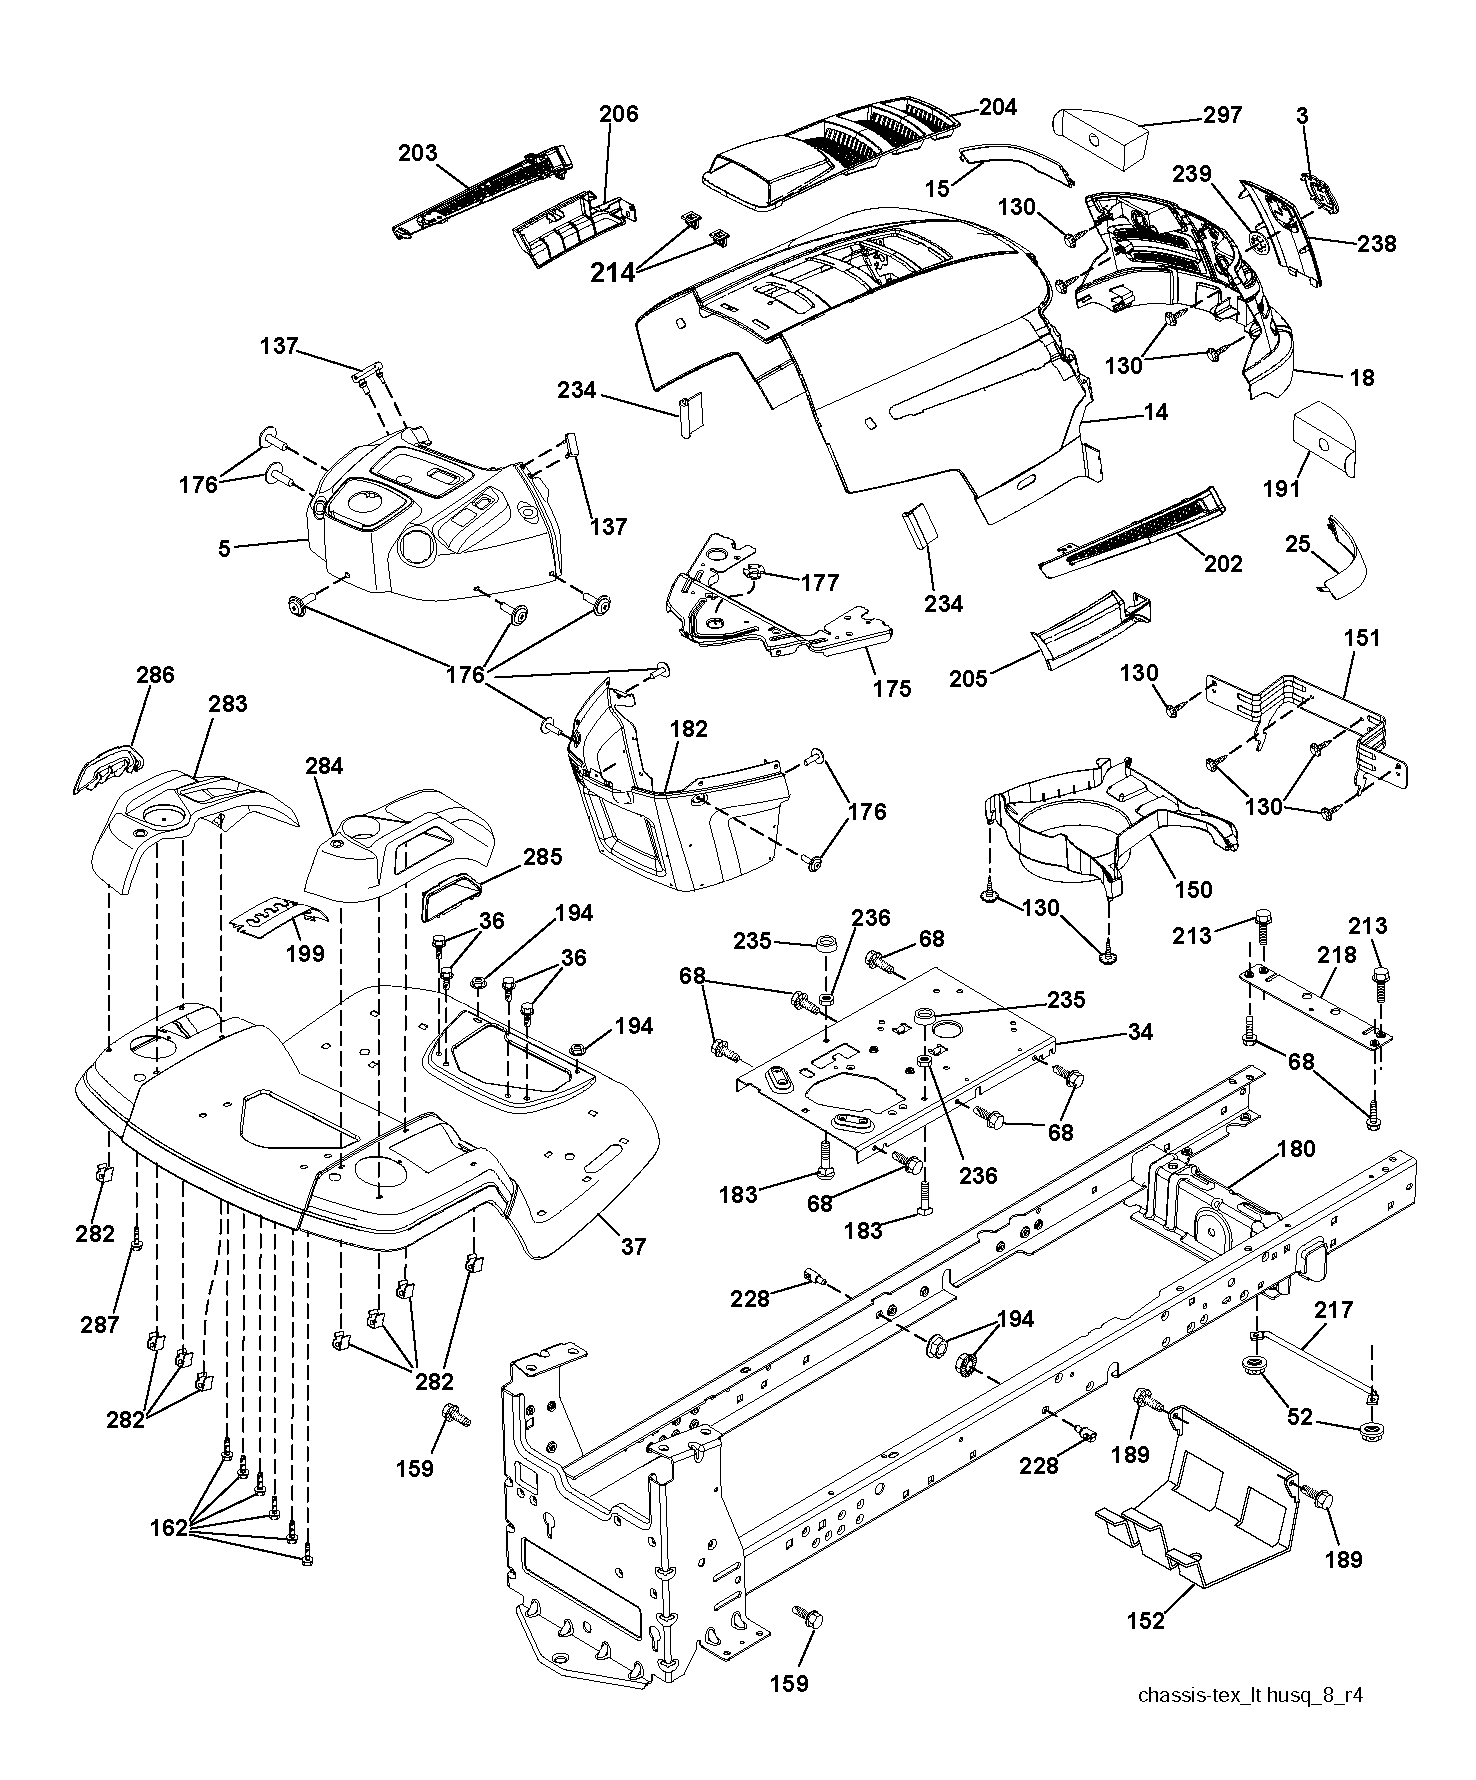 Chassis and appendix 532430771, 532407592, 532441267, 532406664, 532439421, 532406663, 532196125, 596030701, 532441266, 596040501, 596030701, 596321701, 532407590, 532407537, 532407807, 531169901, 817000612, 532142432, 532199472, 532400776, 532195228, 532195457, 532407176, 874520520, 532428867, 532406665, 873900500, 532413485, 532411074, 532411785, 532441375, 532411076, 532411077, 596030501, 532199145, 532409167, 532196395, 593824001, 532404742, 532406129, 873930500, 532444481, 532404883, 532414110, 532416316, 532417887, 532416315, 532416317, 817600406, 532416500